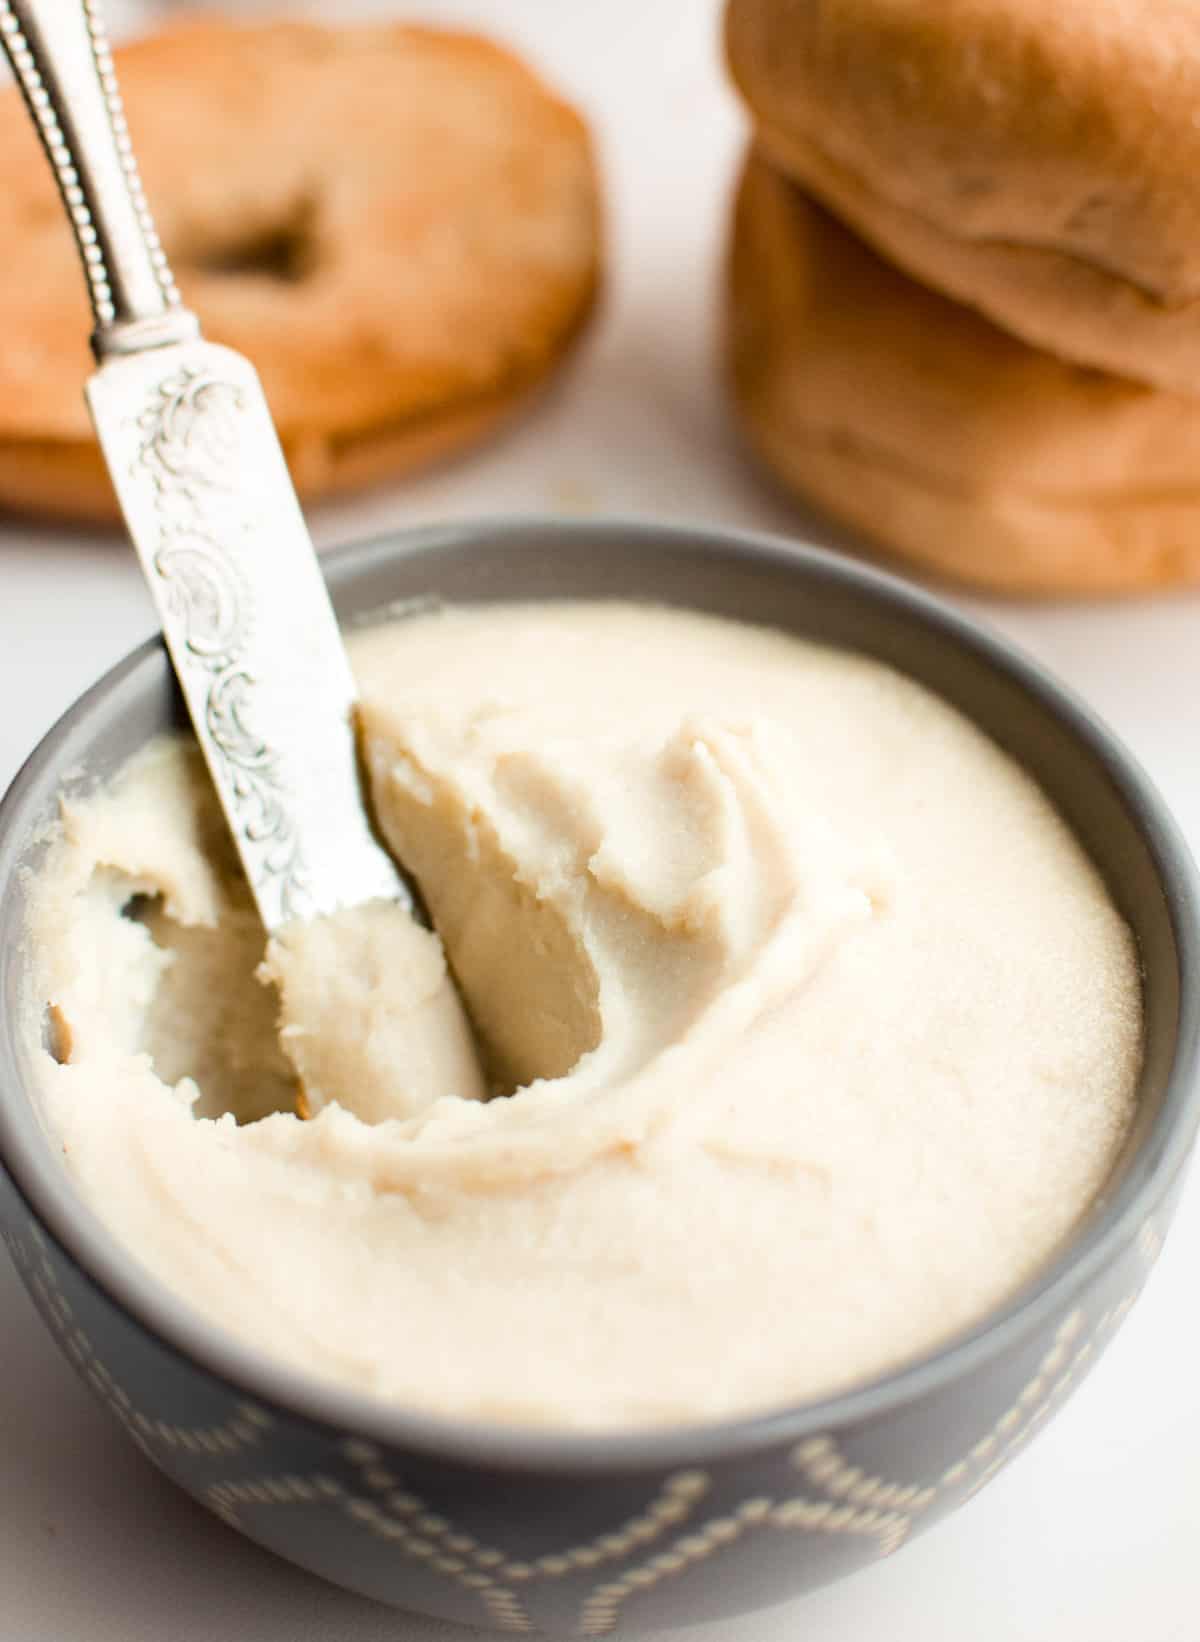 A small gray bowl filled with cashew cream cheese and a knife digging into it.